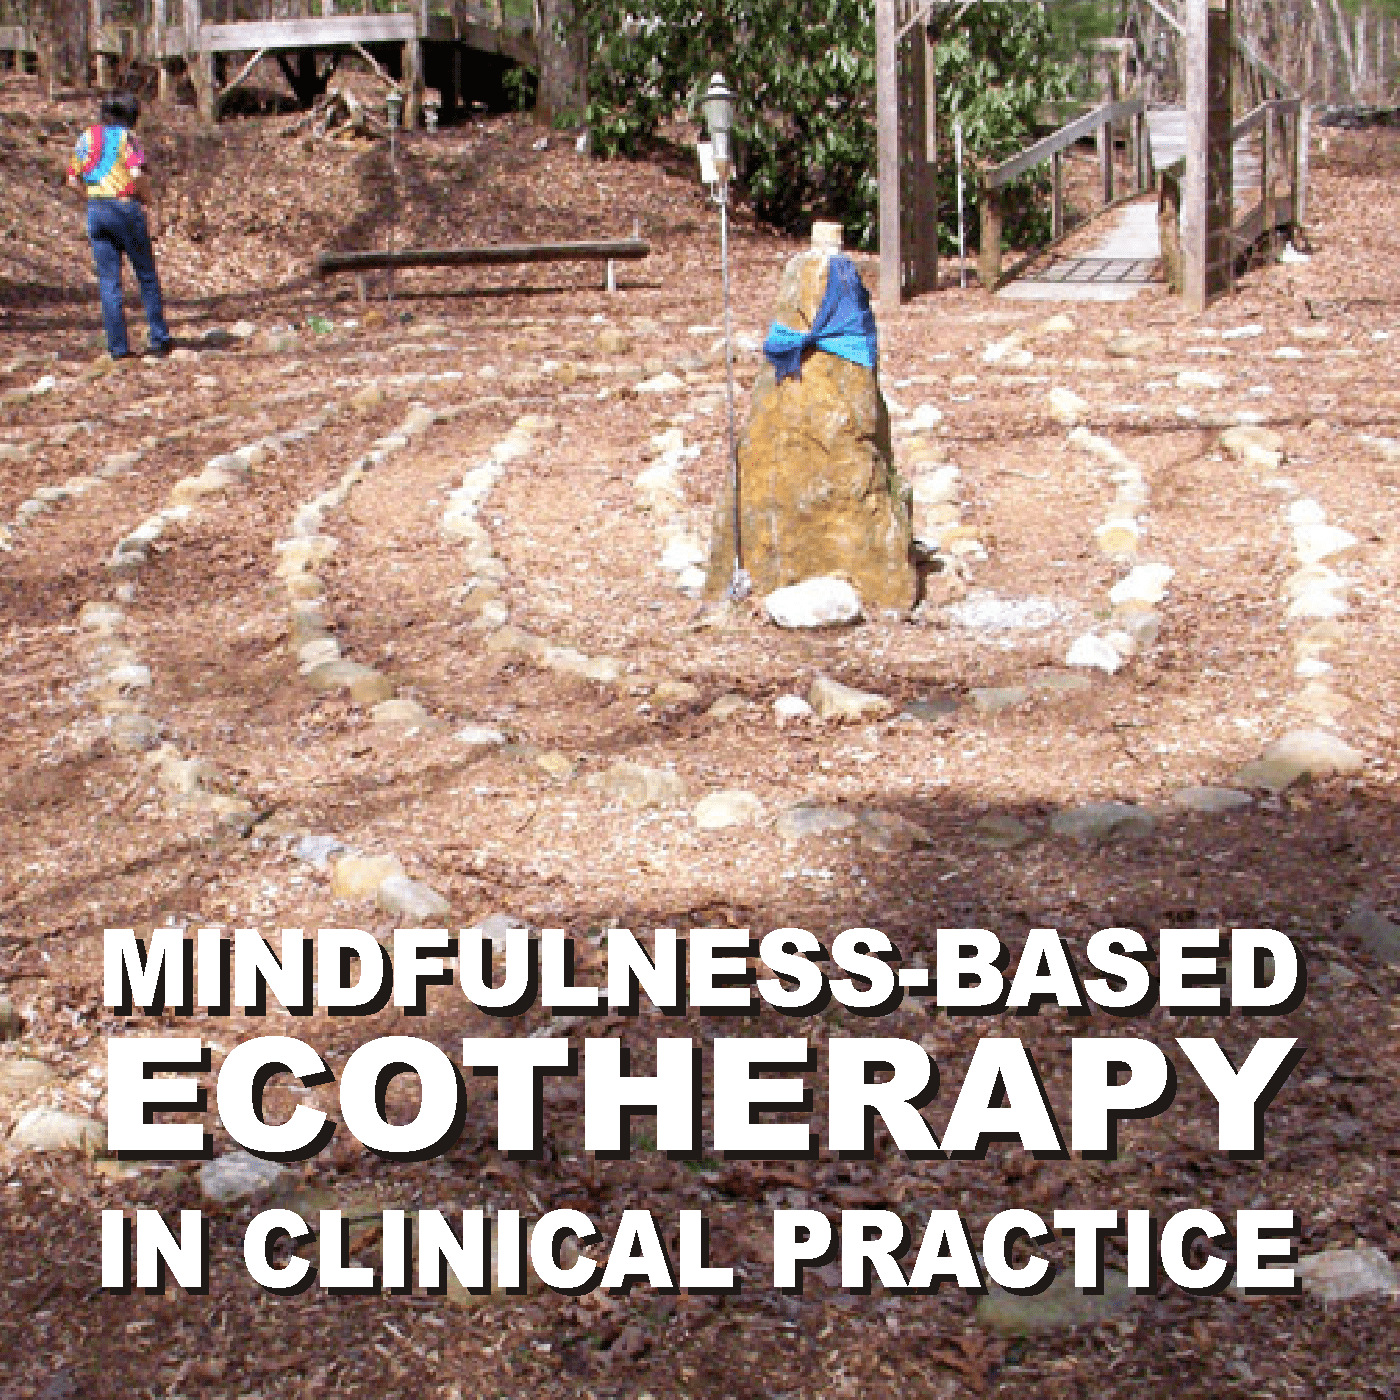 Mindfulness-Based Ecotherapy in Clinical Practice